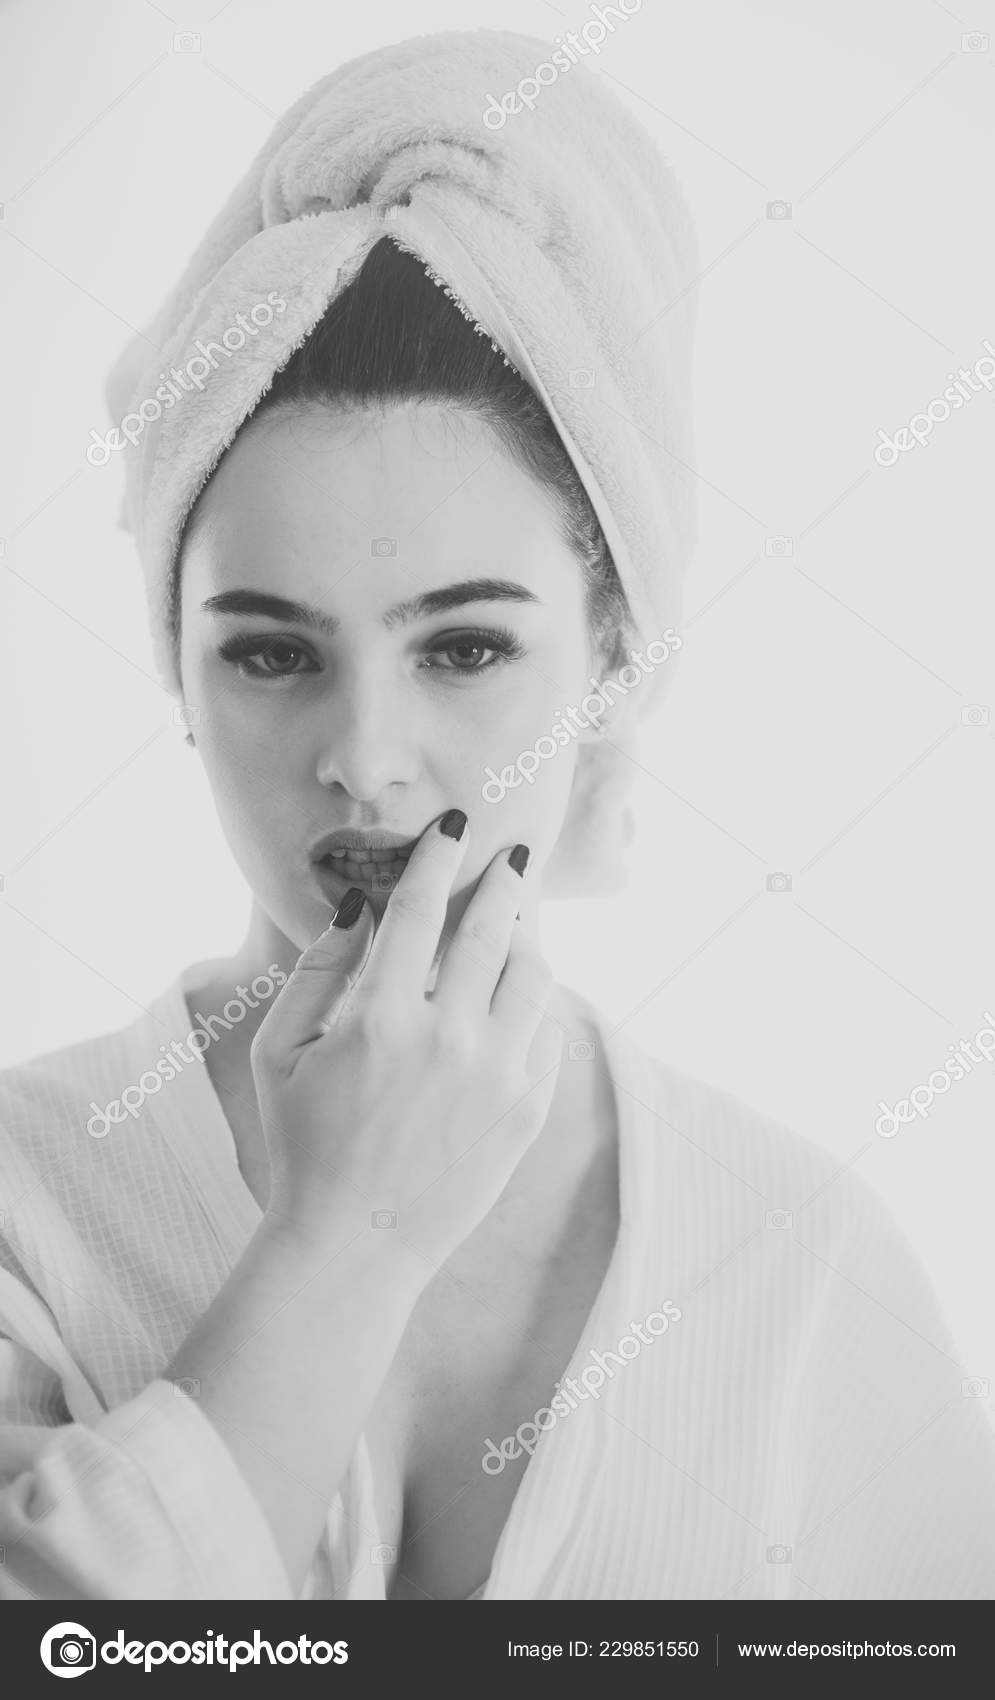 Girl With Towel On Head Relaxing, After Spa Or Morning Shower. Lady With  Mysterious Face And Decollete. Woman In Bathrobe After Wellness And Skin  Care Procedures. Rest, Wellness And And Care Concept.